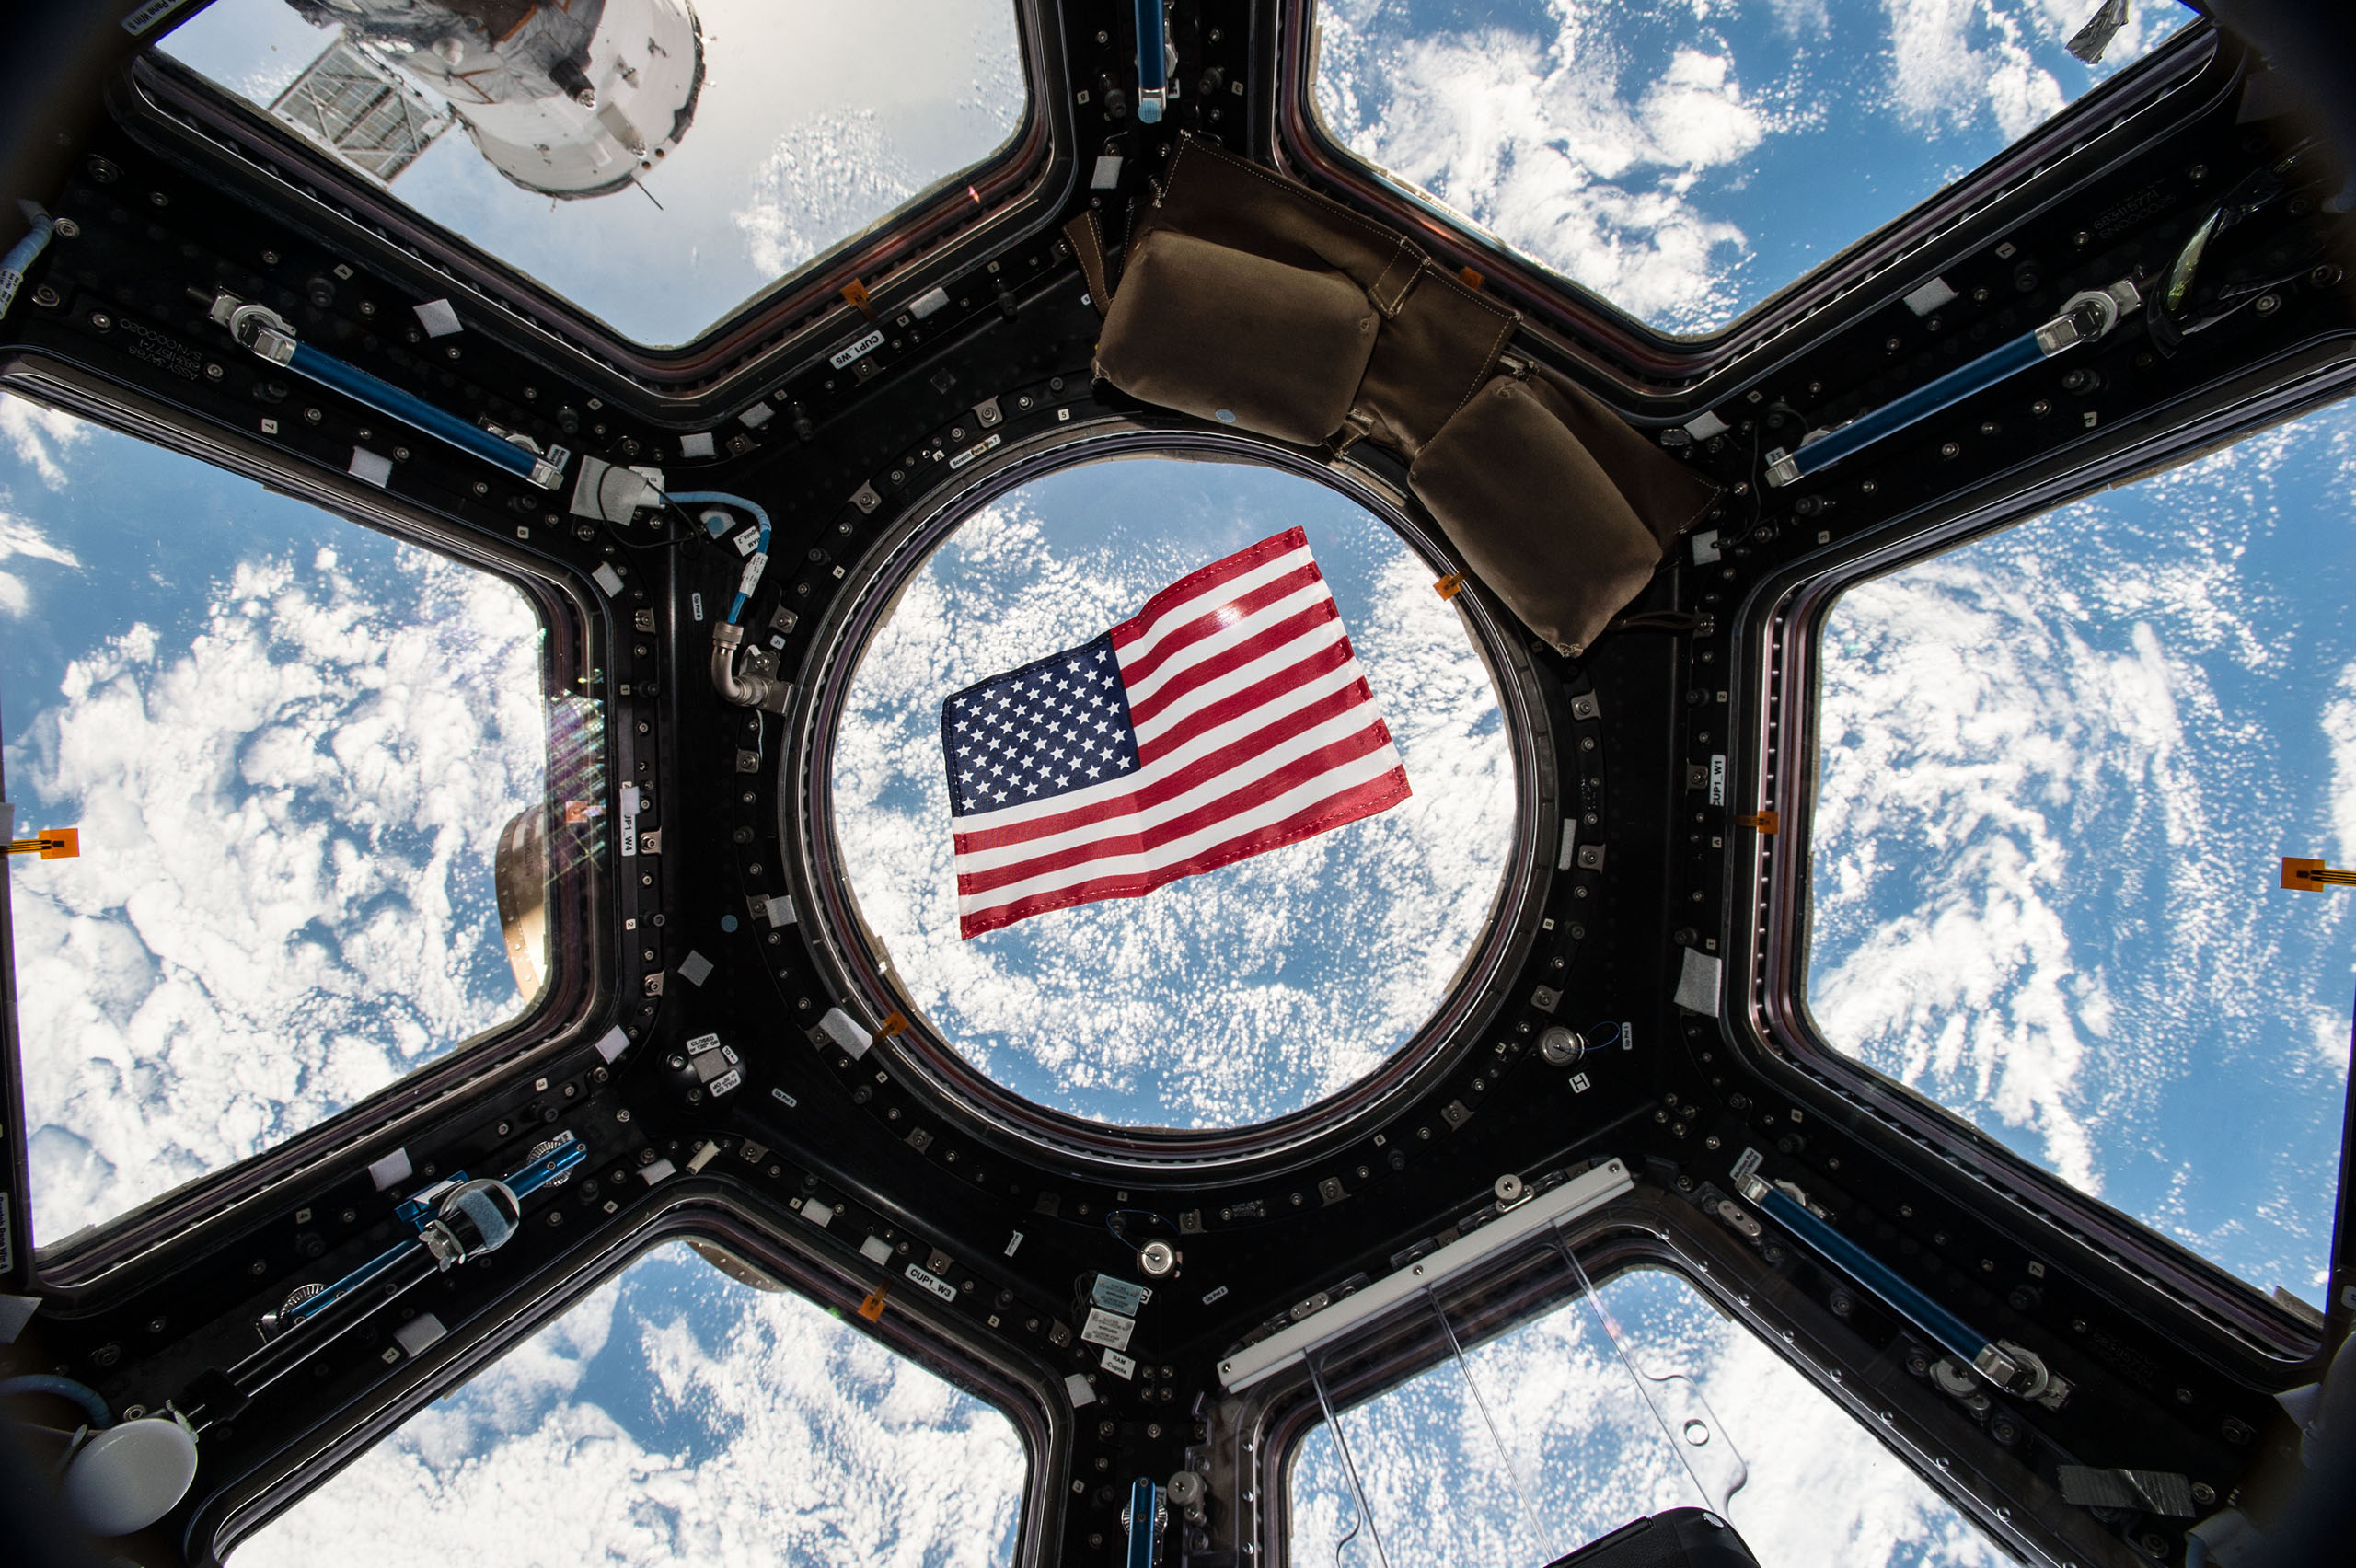 Election Day 2016 aboard the space station. Thanks to a bill passed by Texas legislators that put in place technical voting procedure for astronauts, they have the ability to vote from space through specially designed absentee ballots.